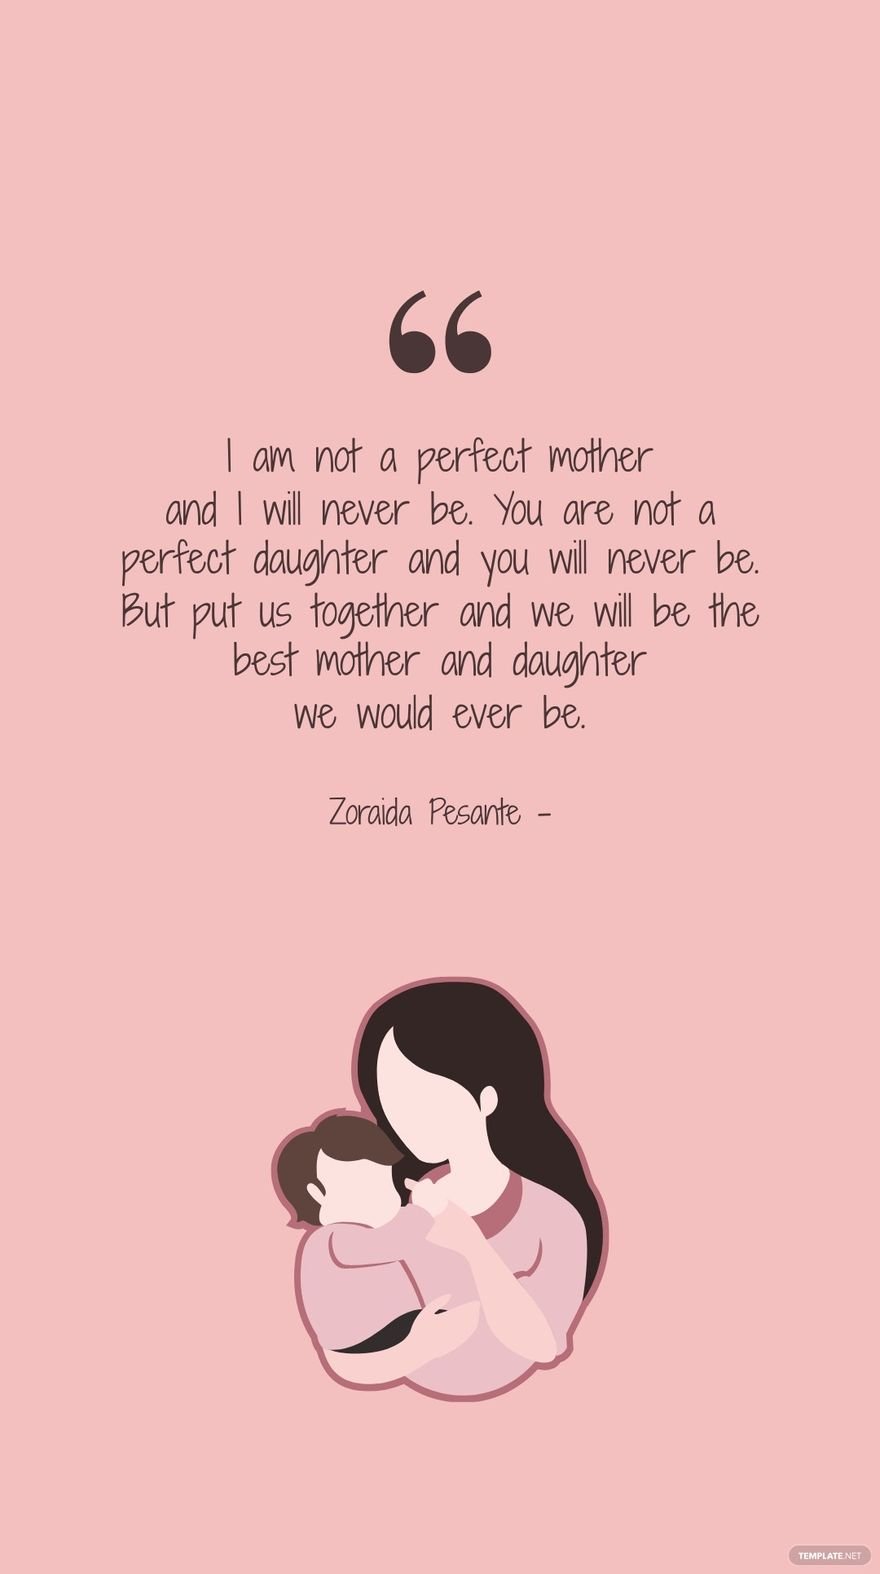 Zoraida Pesante - I am not a perfect mother and I will never be. You are not a perfect daughter and you will never be. But put us together and we will be the best mother and daughter we would ever be.